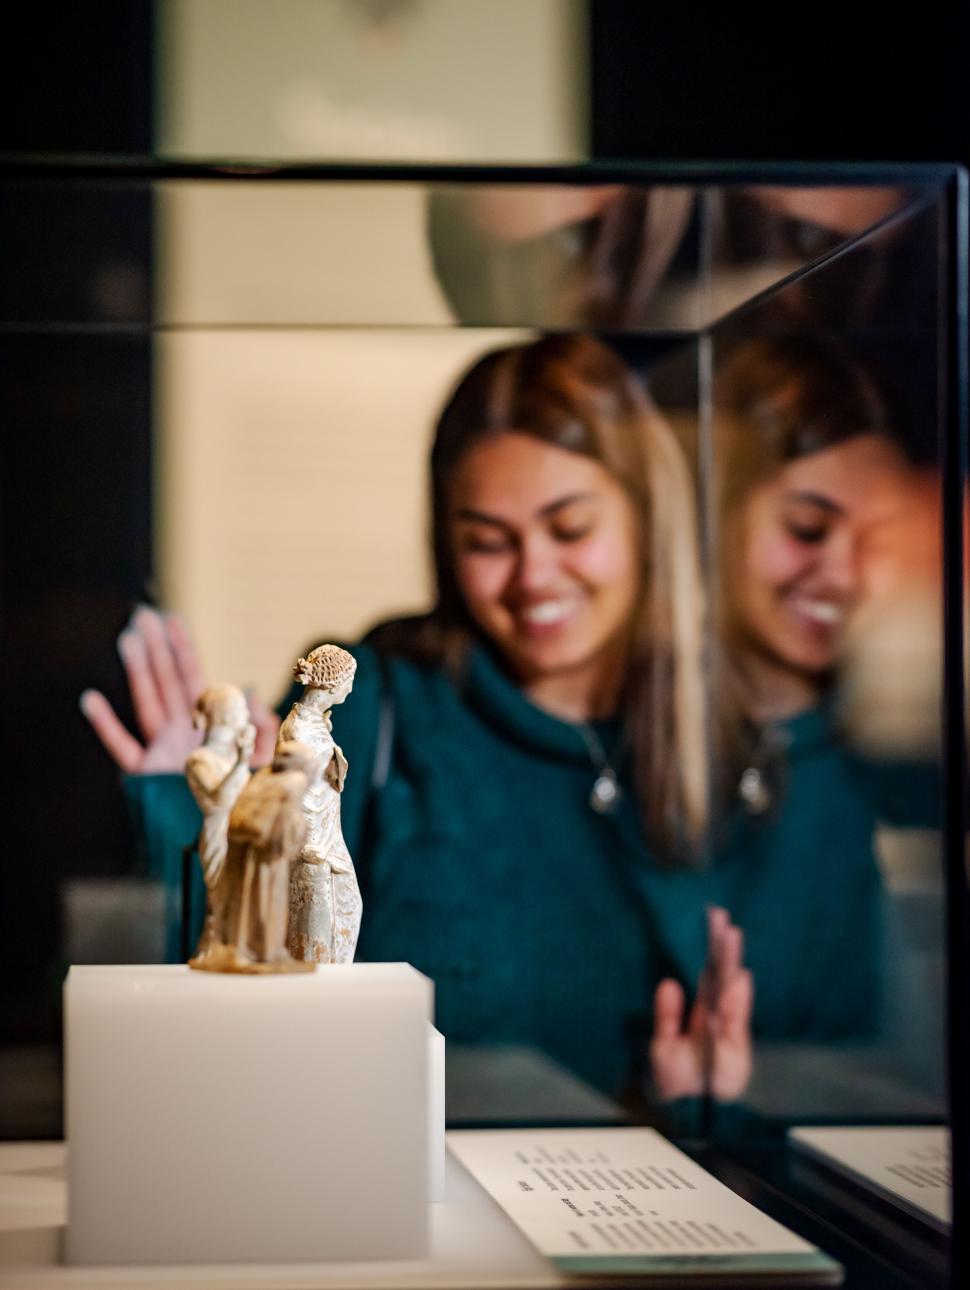 A female visitor looking at sculptures of women